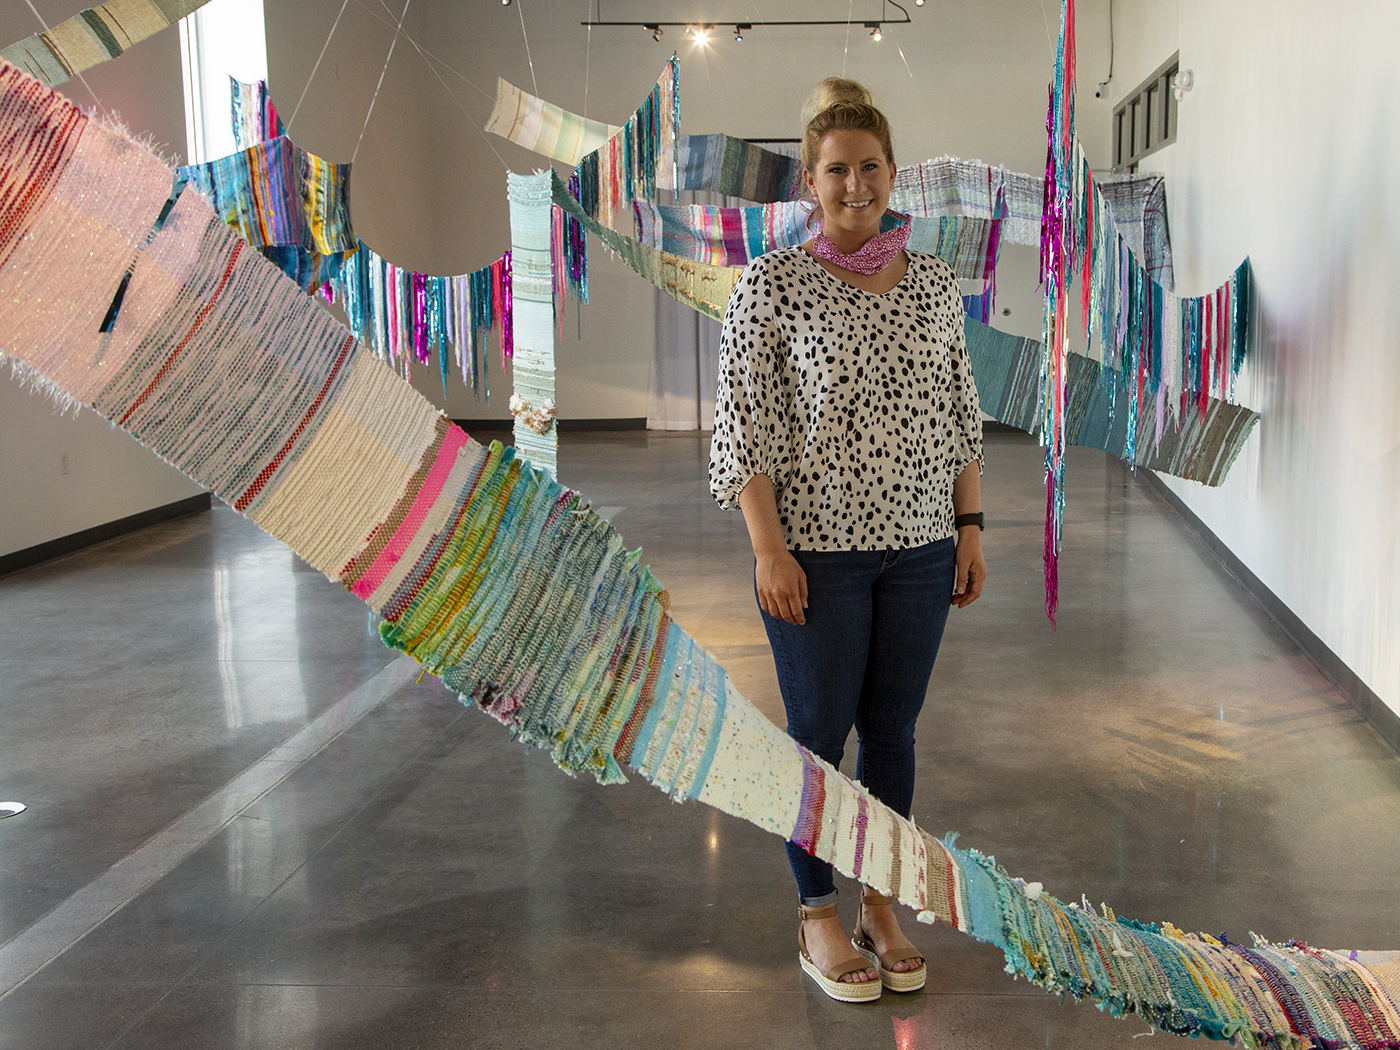 Amy Huser stands in the middle of "Casually Not Okay," her Master of Fine Arts thesis exhibition. She is surrounded by brightly colored weavings that are hung from the ceiling.